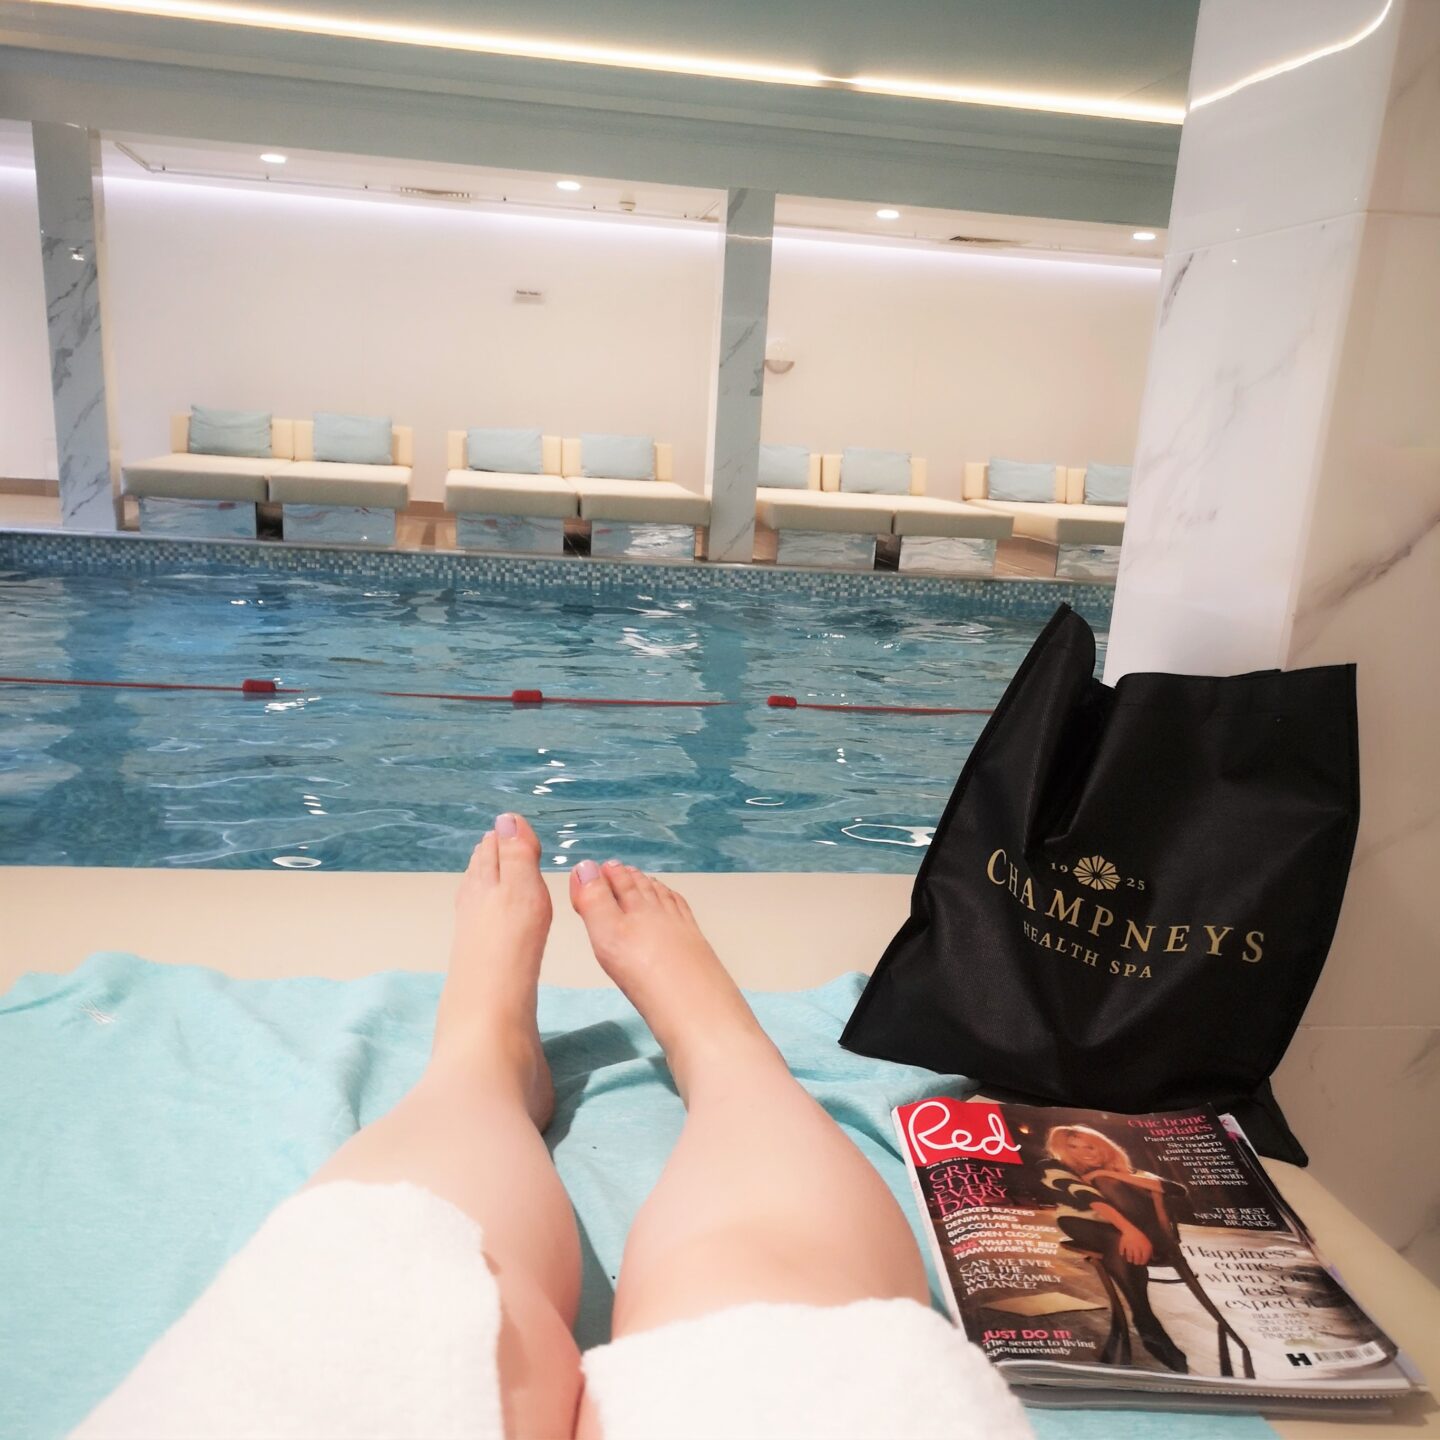 Champneys Spa Day At Eastwell Manor, Champneys Spa, Eastwell Manor, Luxury Spa Hotel, Spa Day, Things To Do in Kent, Spa Day Review, The Frenchie Mummy, Kent Hotel, Luxury Spa, Champneys Spa Day, Girls Day Out, Relaxing 